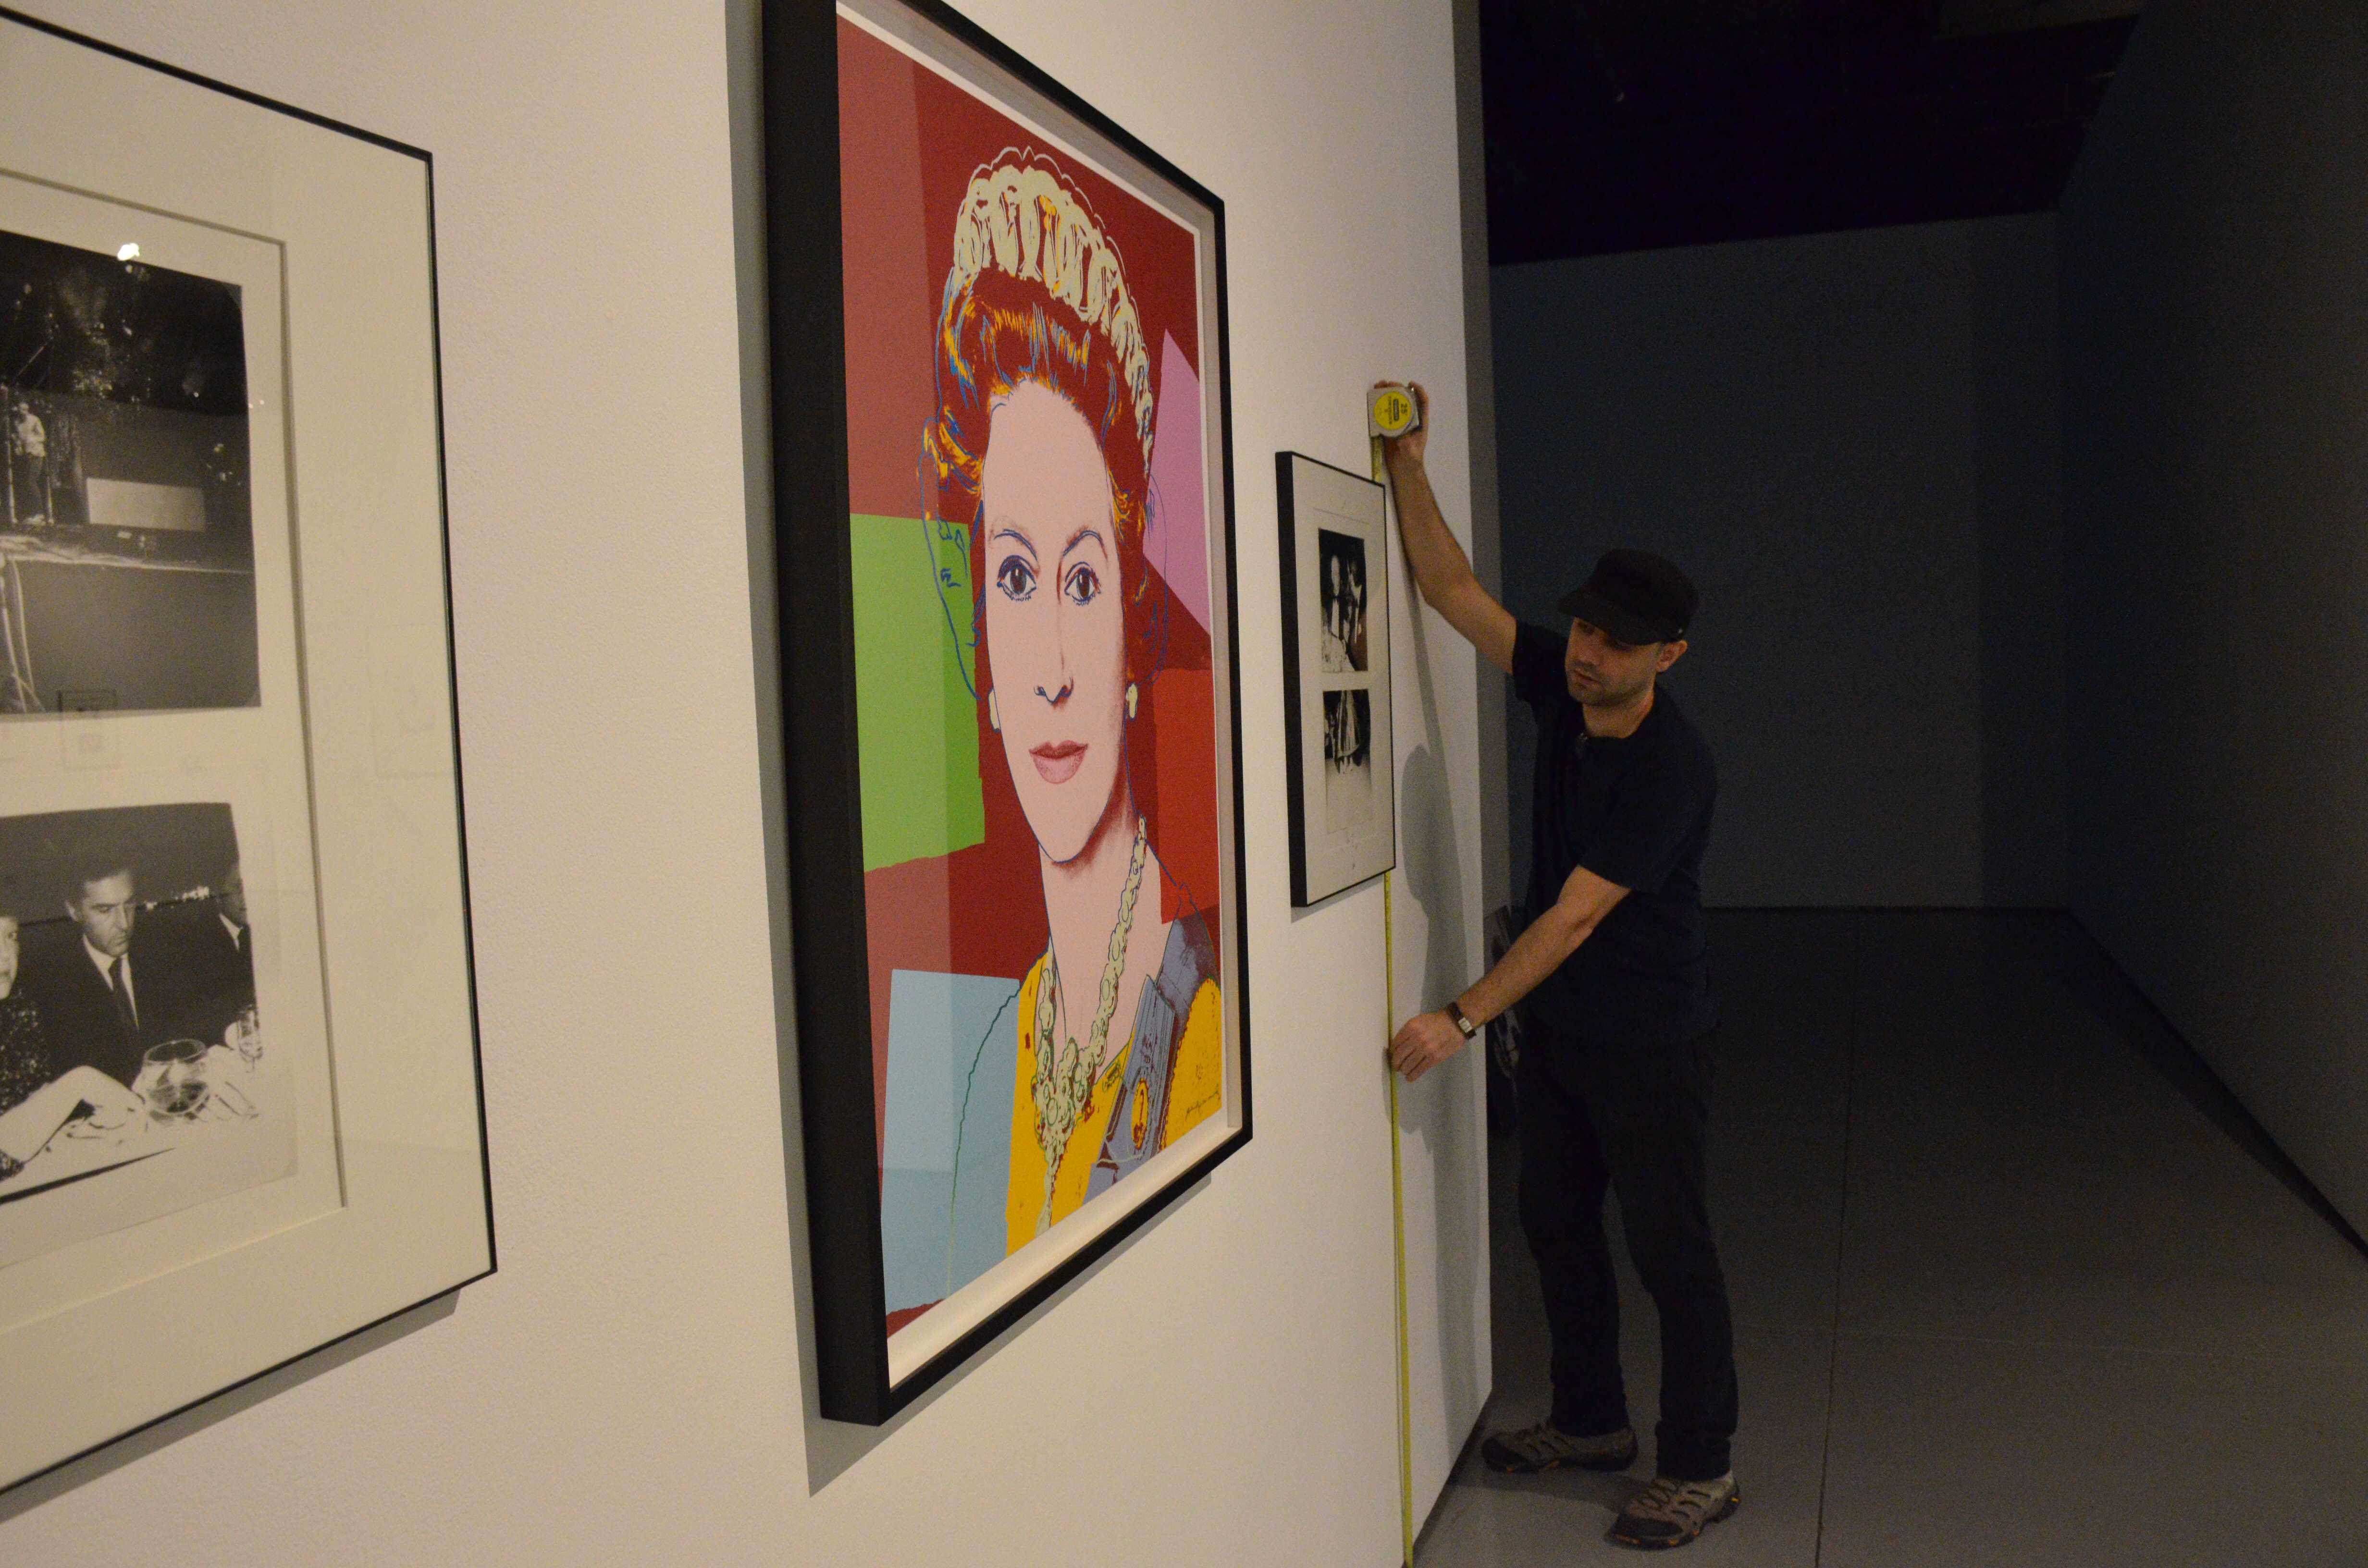 Mario Omid, a CSUN  graduate student and gallery assistant, helps set up the Main Gallery for the upcoming Andy Warhol exhibit.